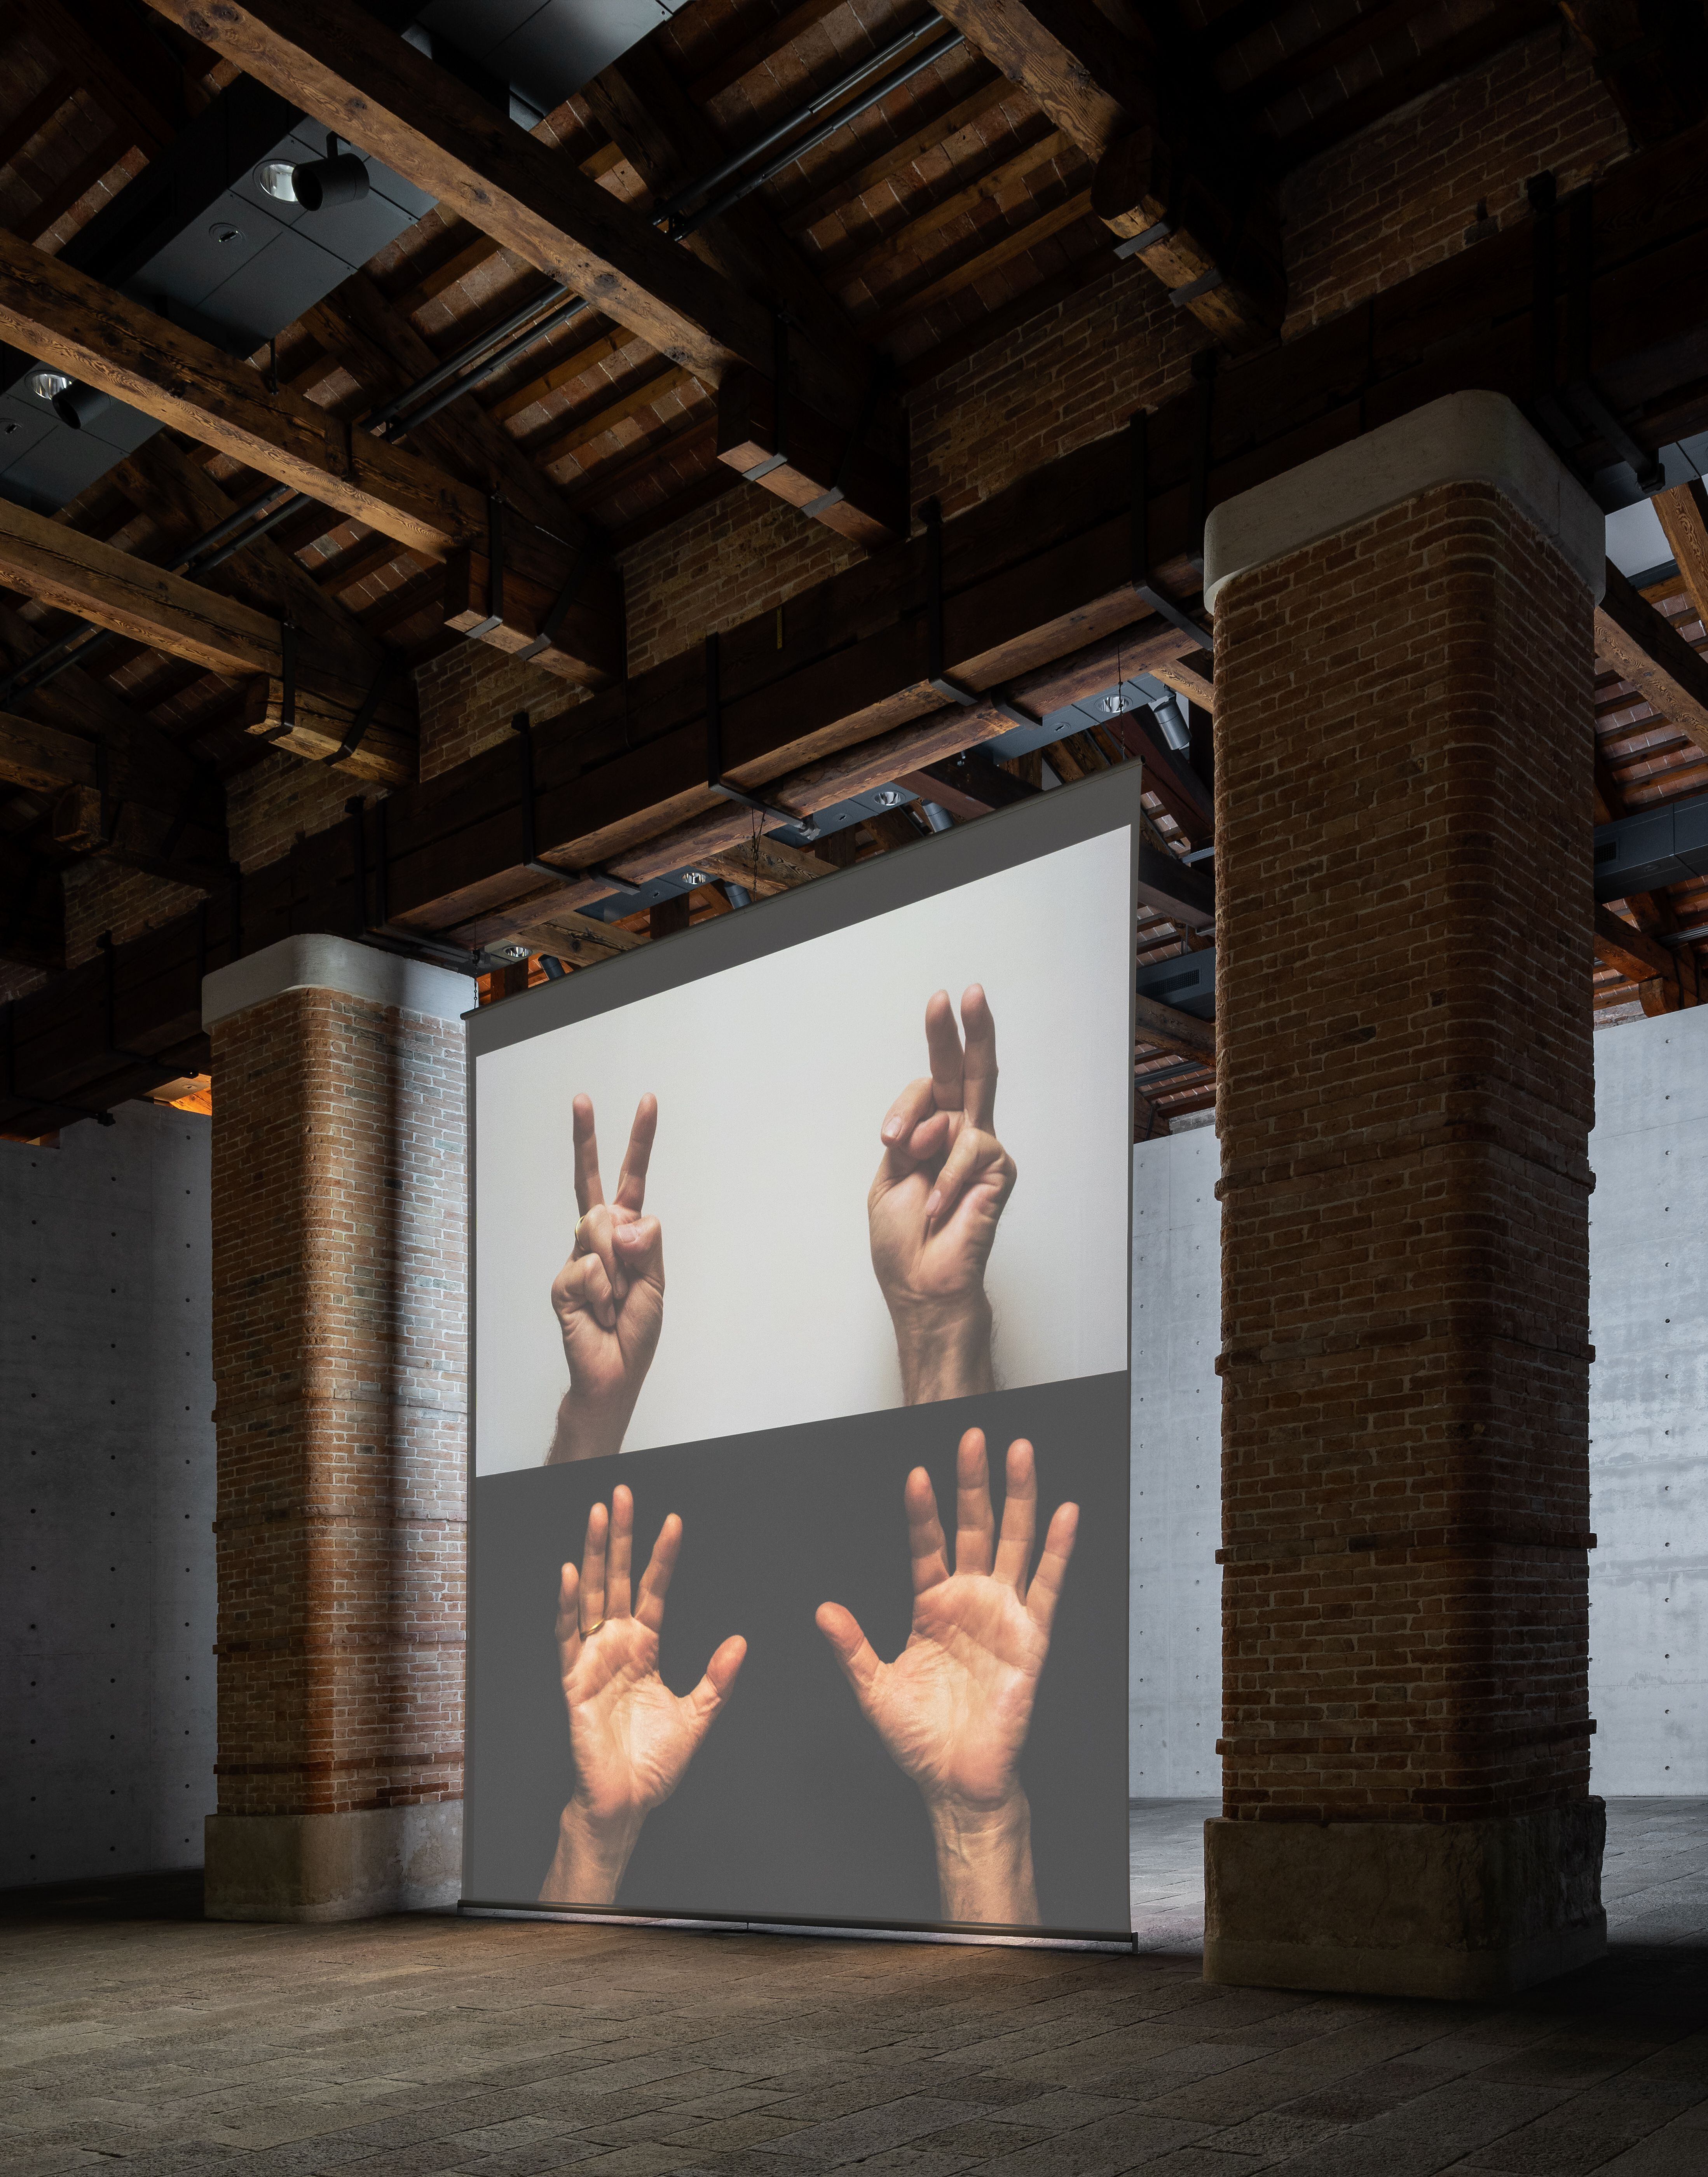 'For Beginners (all the combinations of thumb and fingers)' (2010), de Bruce Nauman. M. CAPPELLETTI / PALAZZO GRASSI